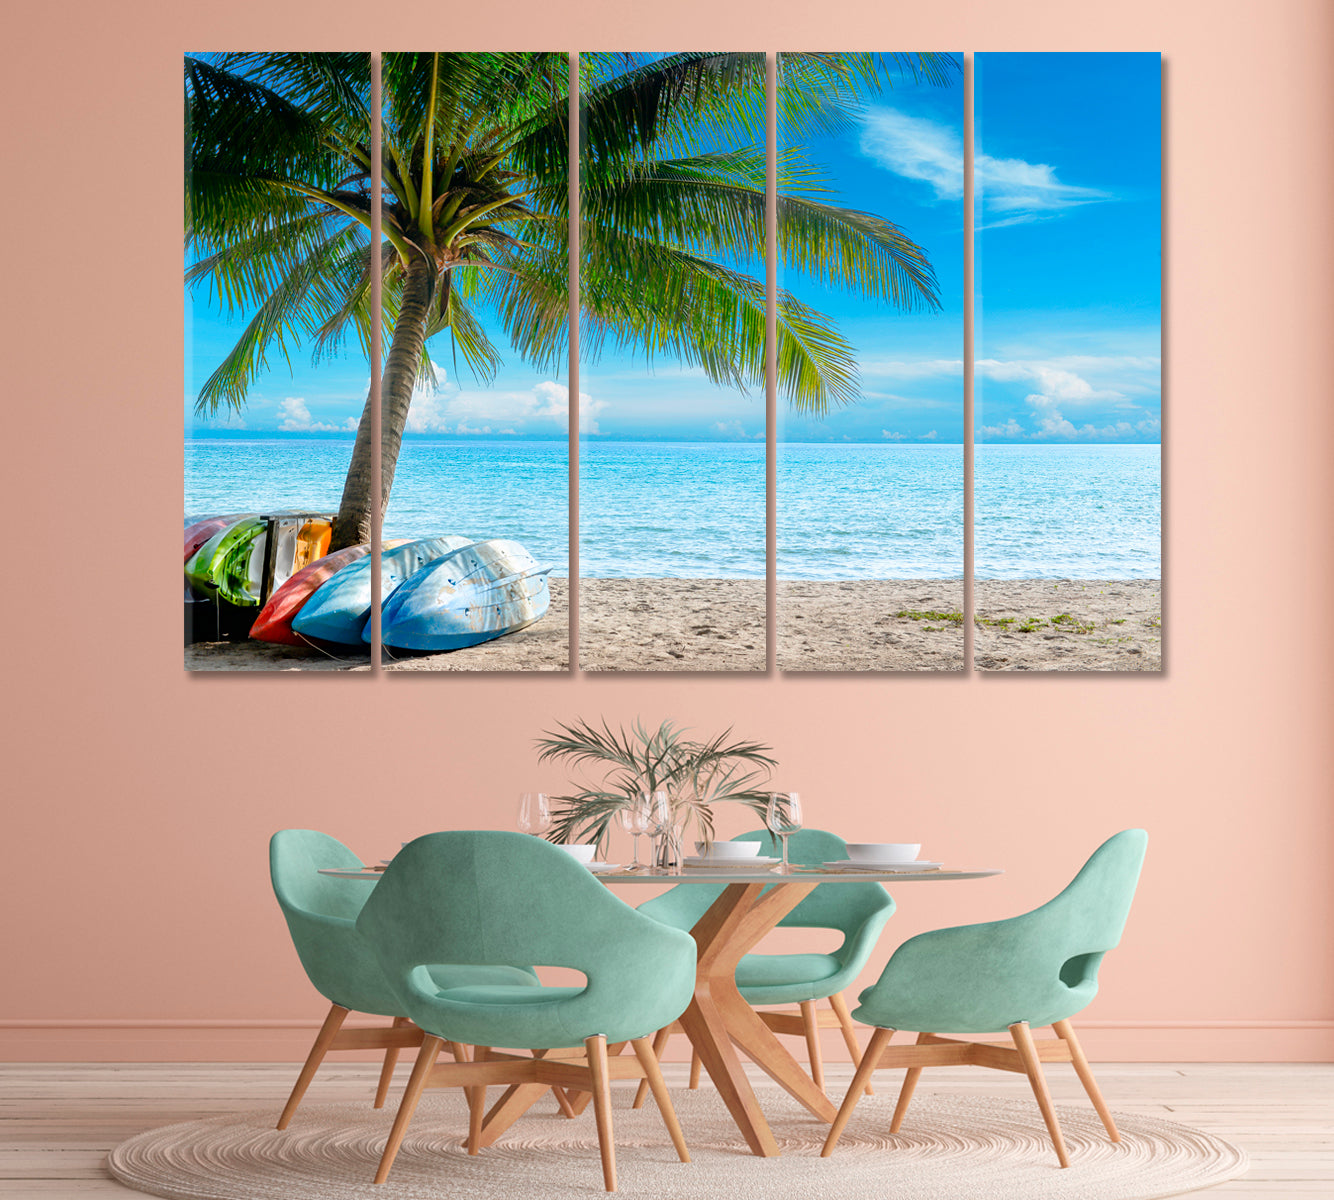 Kayak on Sunny Tropical Beach with Palm Trees Canvas Print-Canvas Print-CetArt-1 Panel-24x16 inches-CetArt